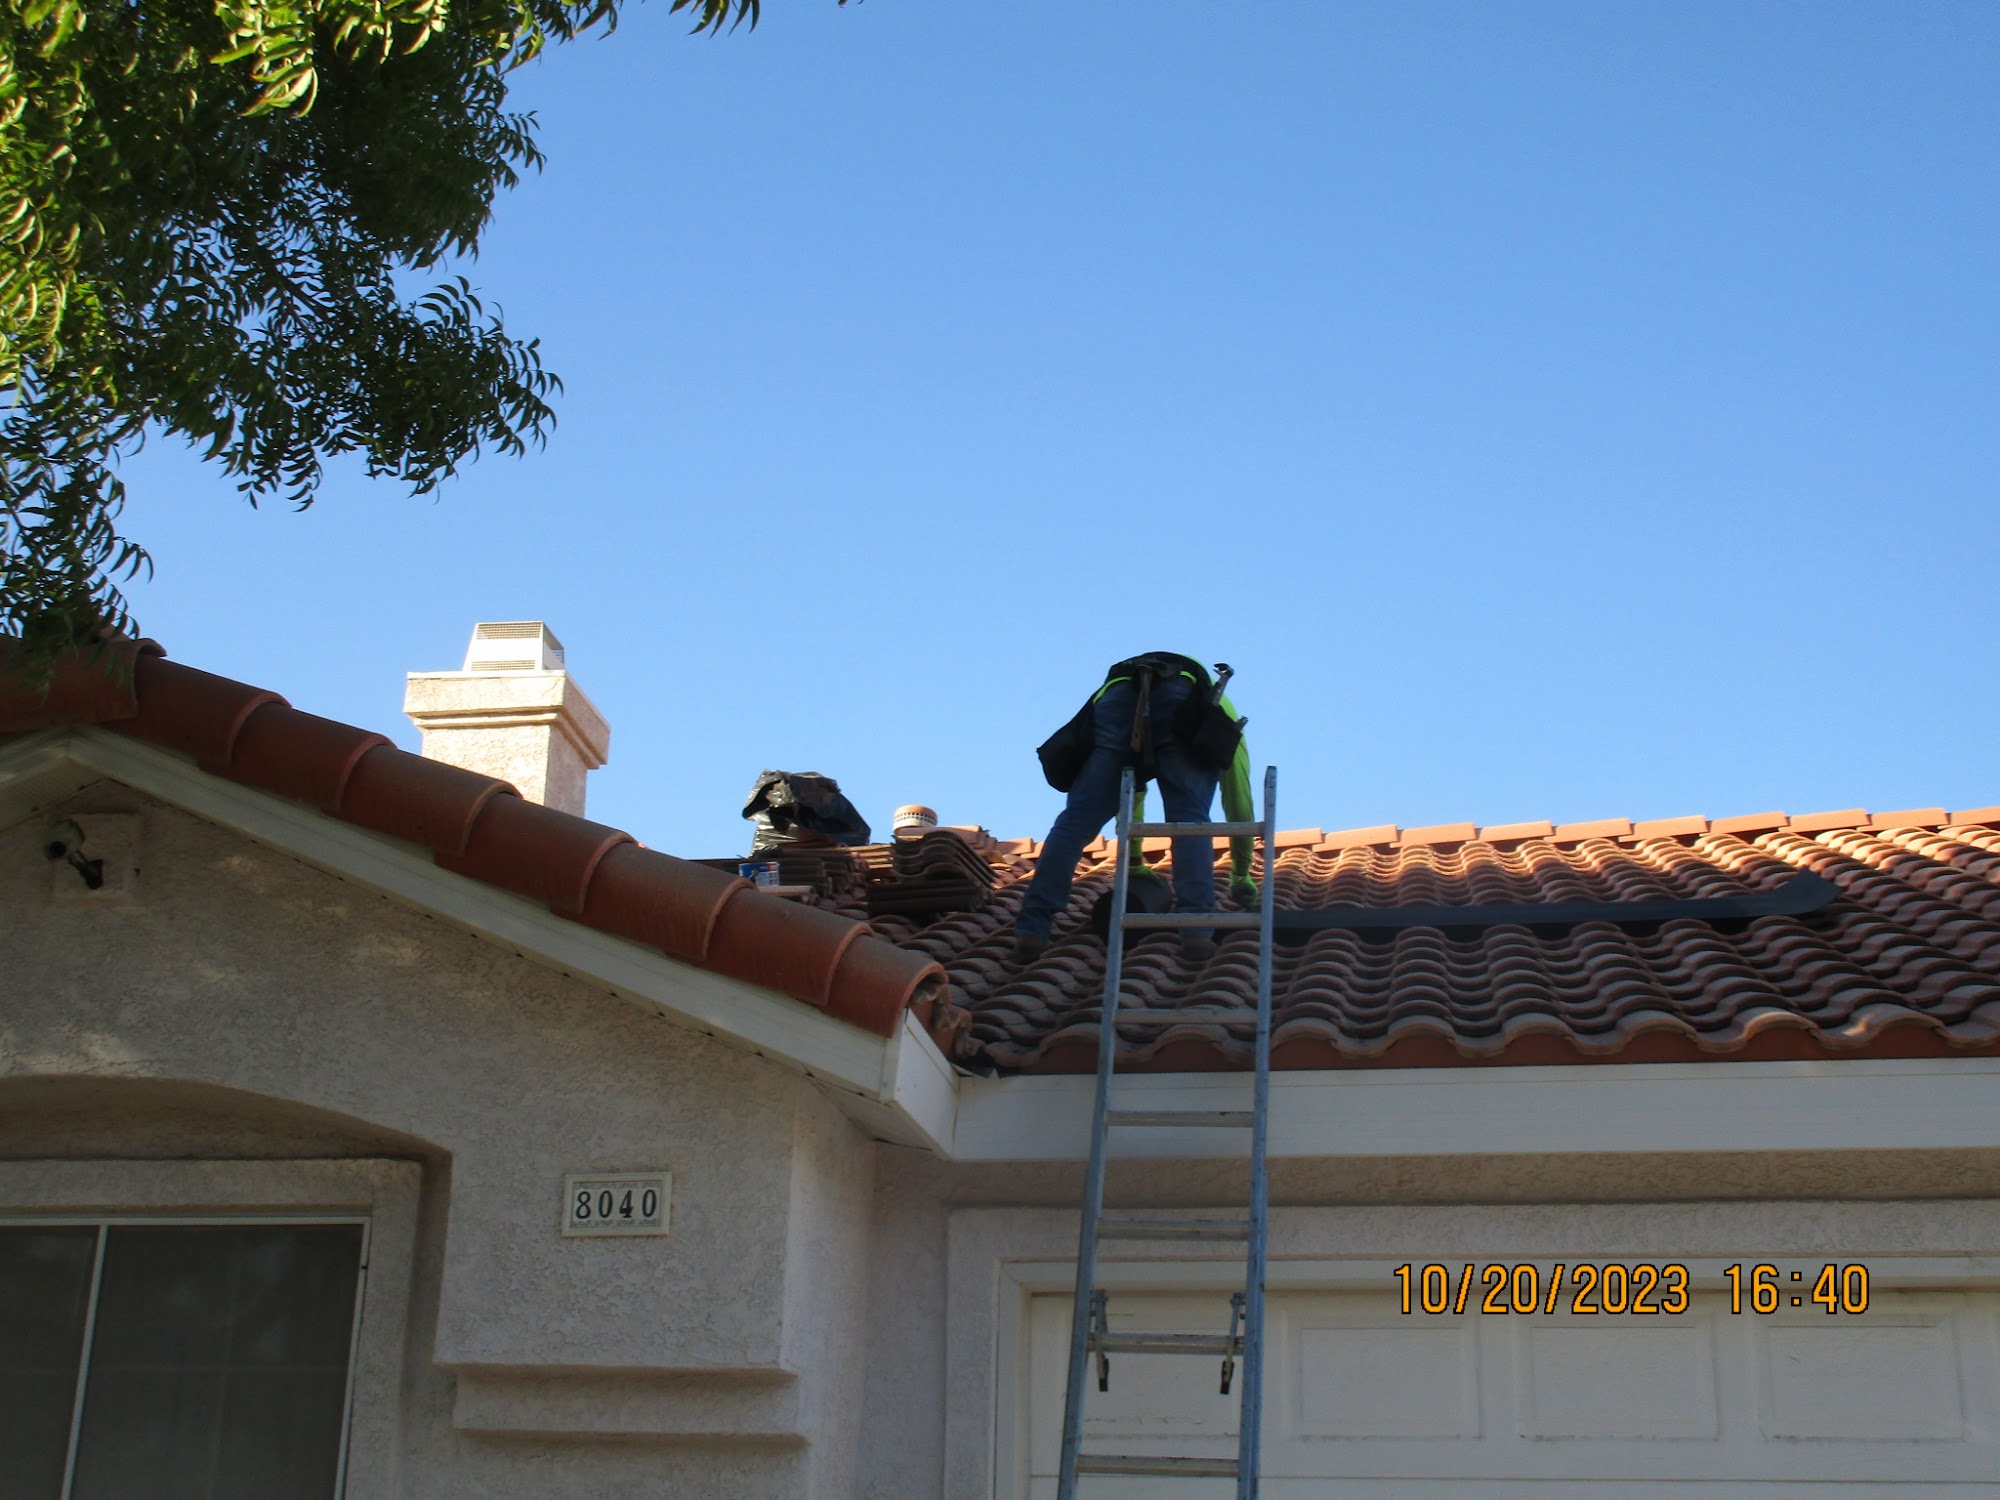 Baccus Roofing